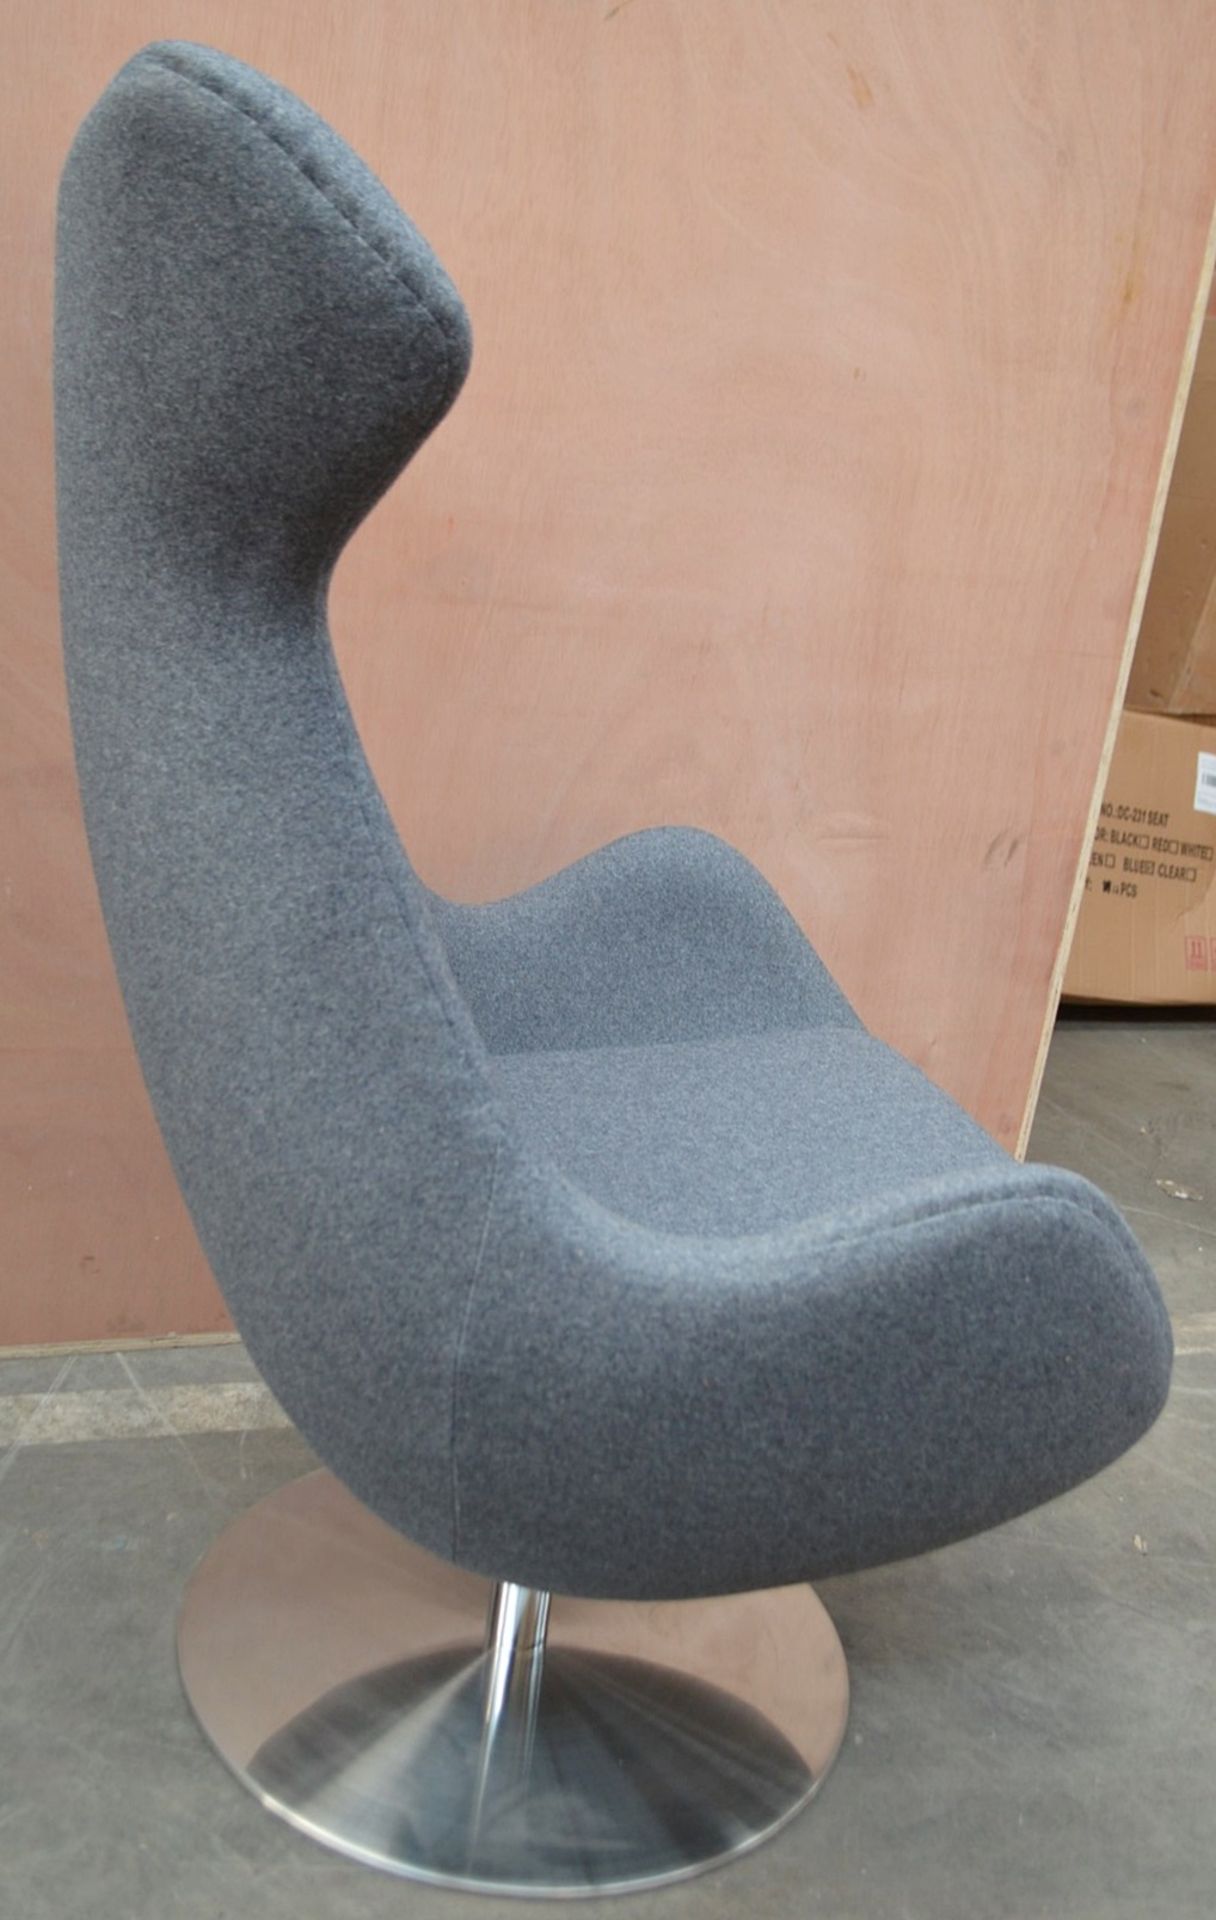 1 x Arne Jacobsen-Inspired Egg Lounge Chair - Upholstered In Grey Cashmere With Steel Base - Image 12 of 13